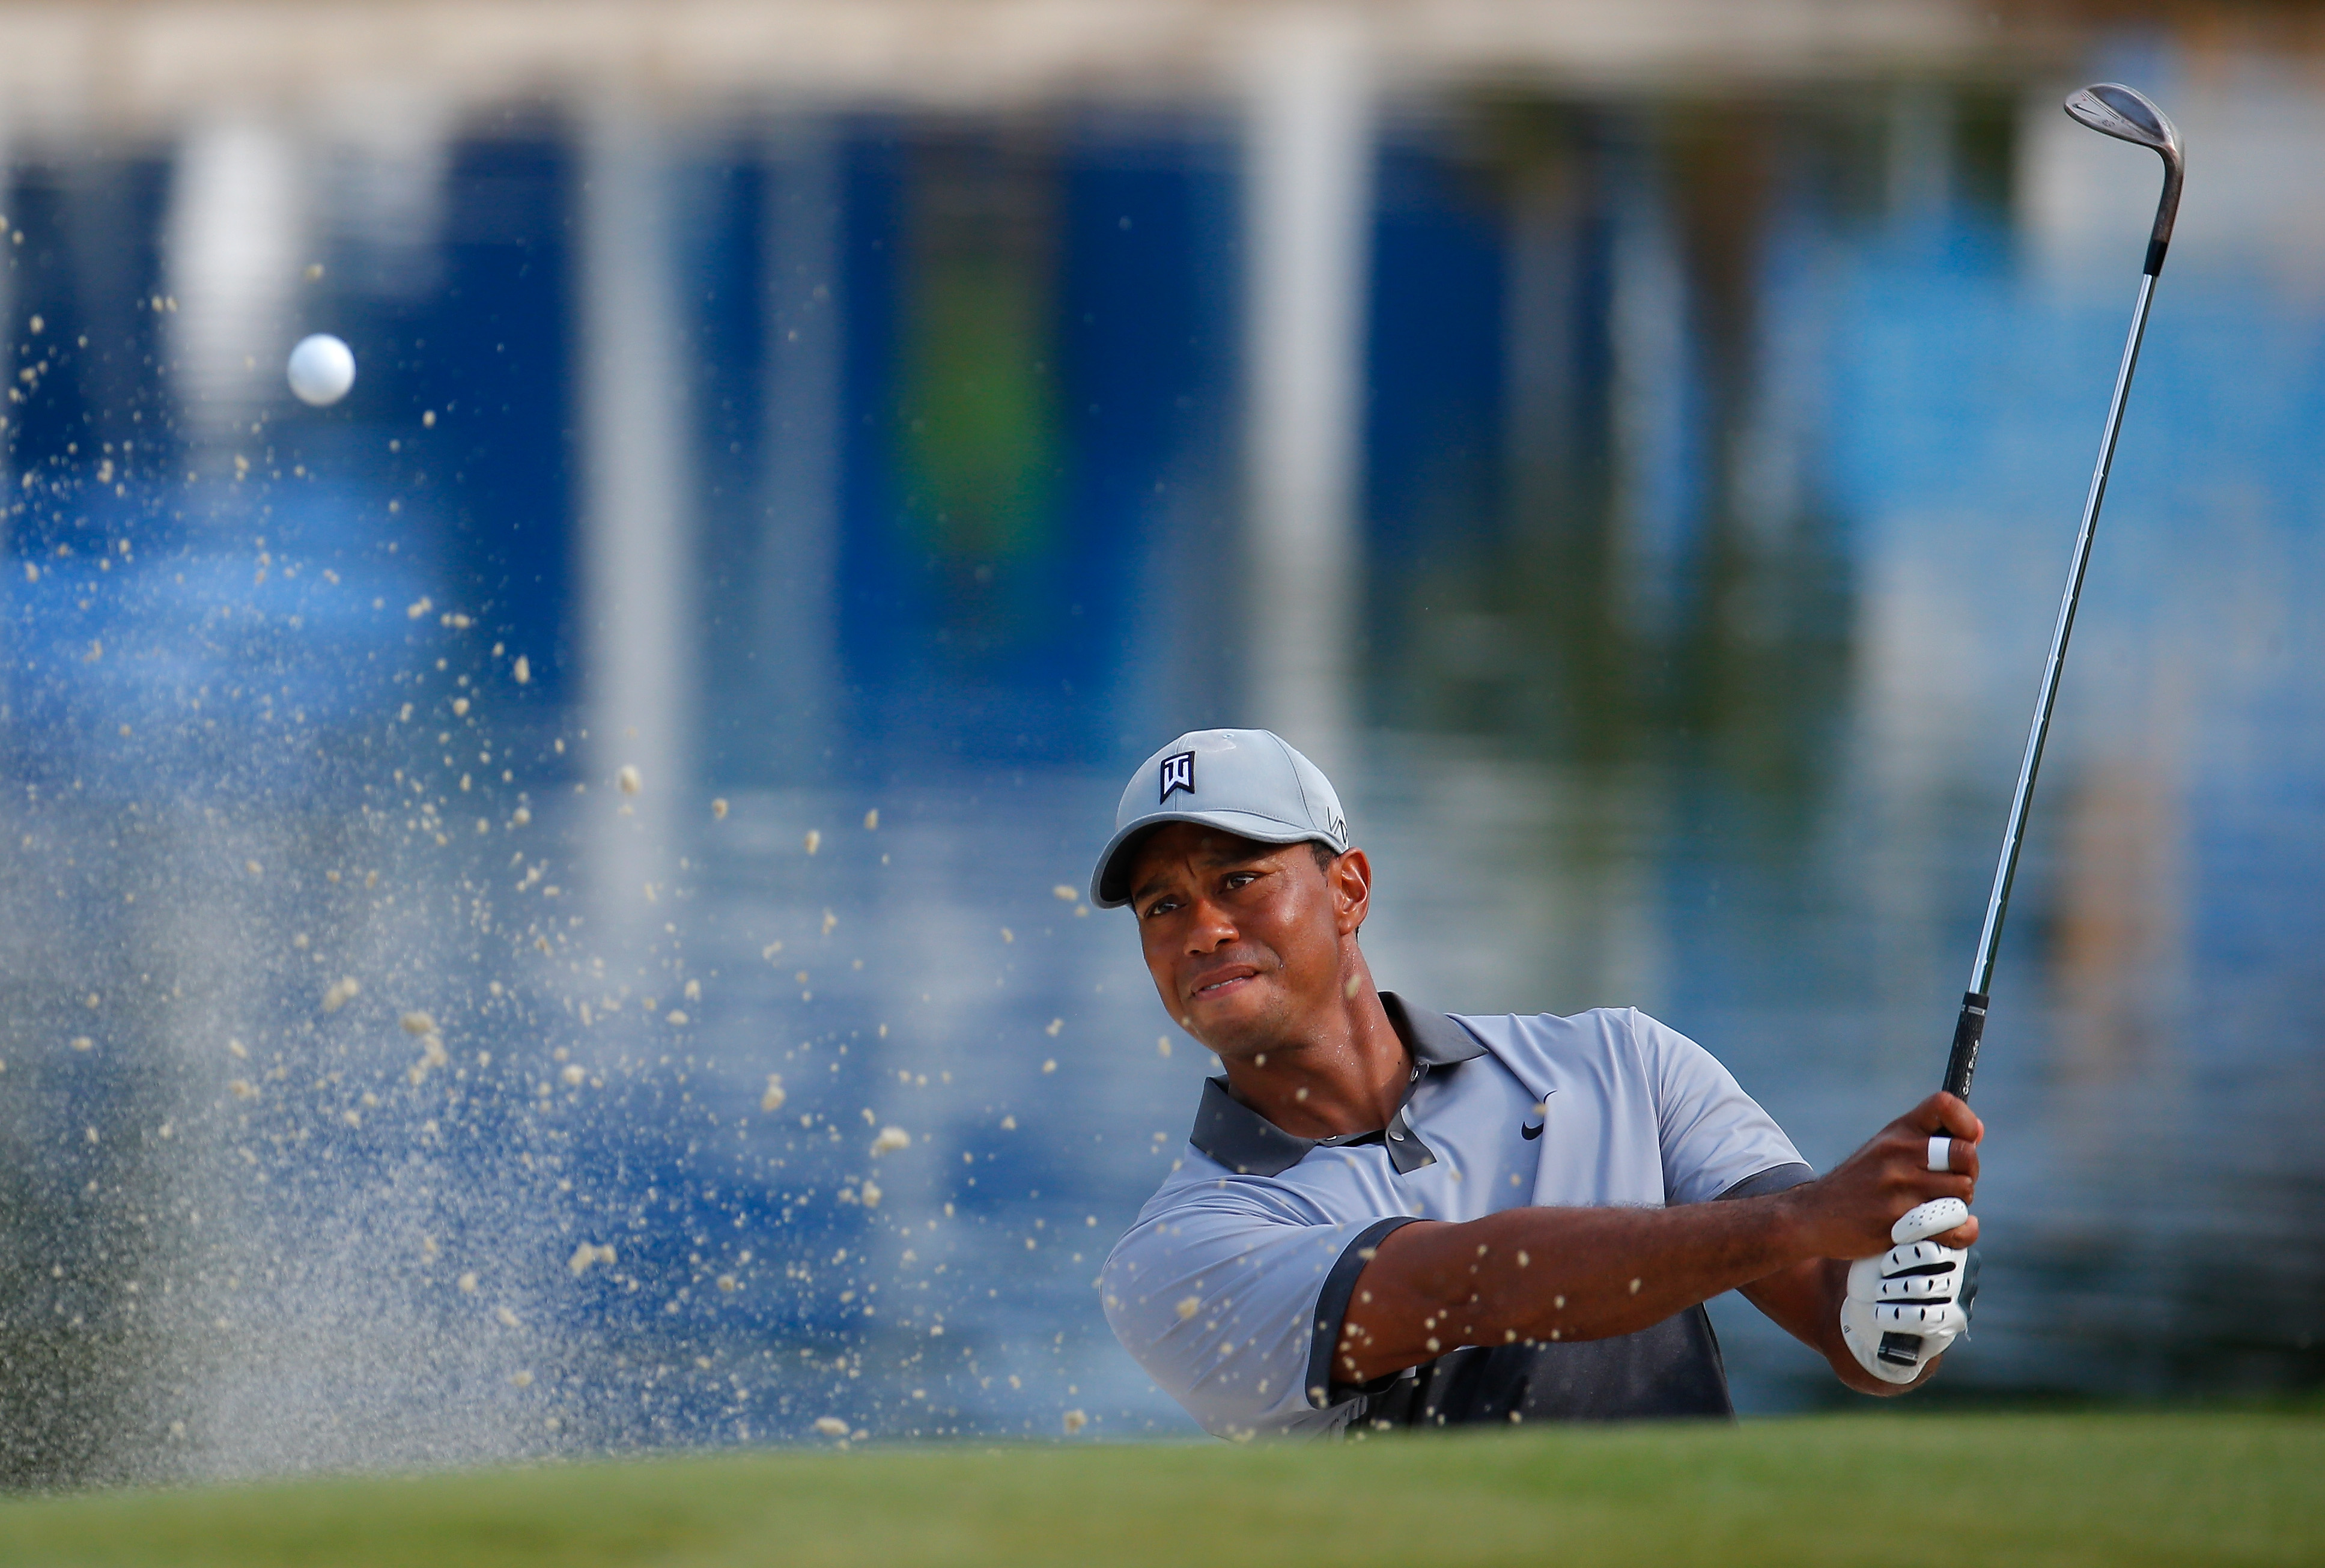 If bunker play is your weakness, get deadly at it, says David Aitchison (Photo: Getty Images)